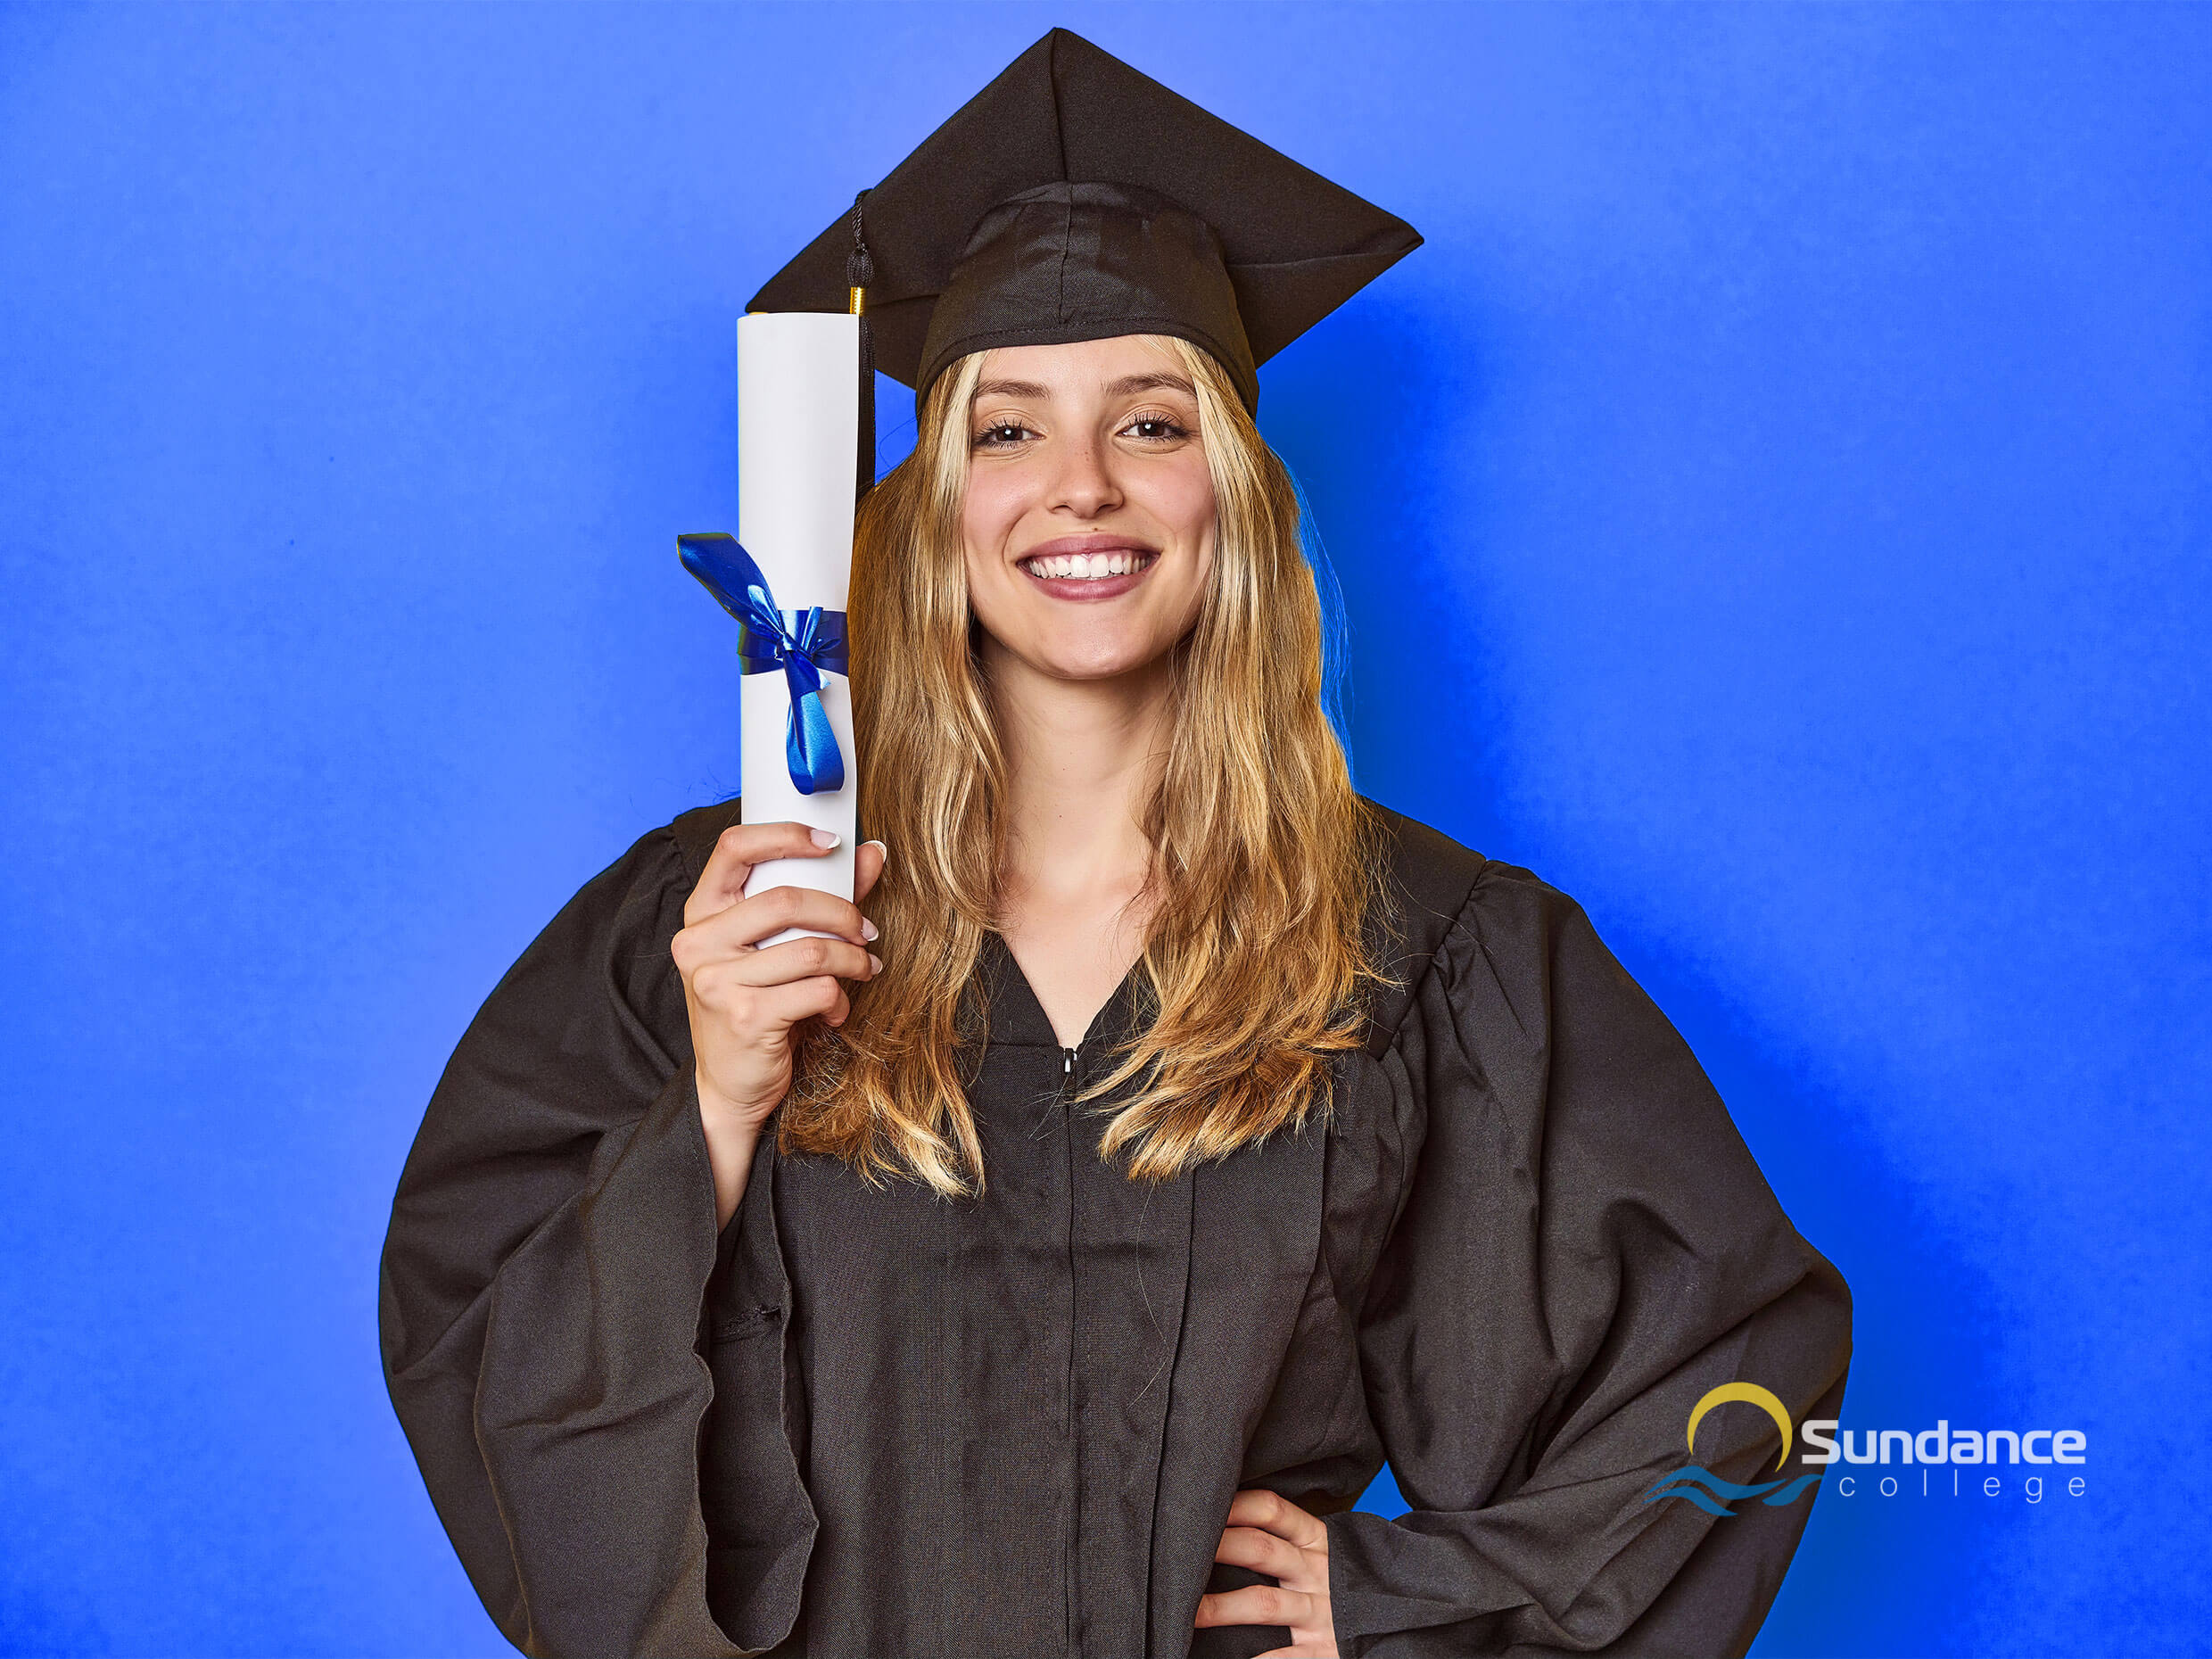 a medium portrait of a young woman in graduation cap and gown smiling and holding a diploma, satisfied with her career prospects after finishing a payroll administration diploma